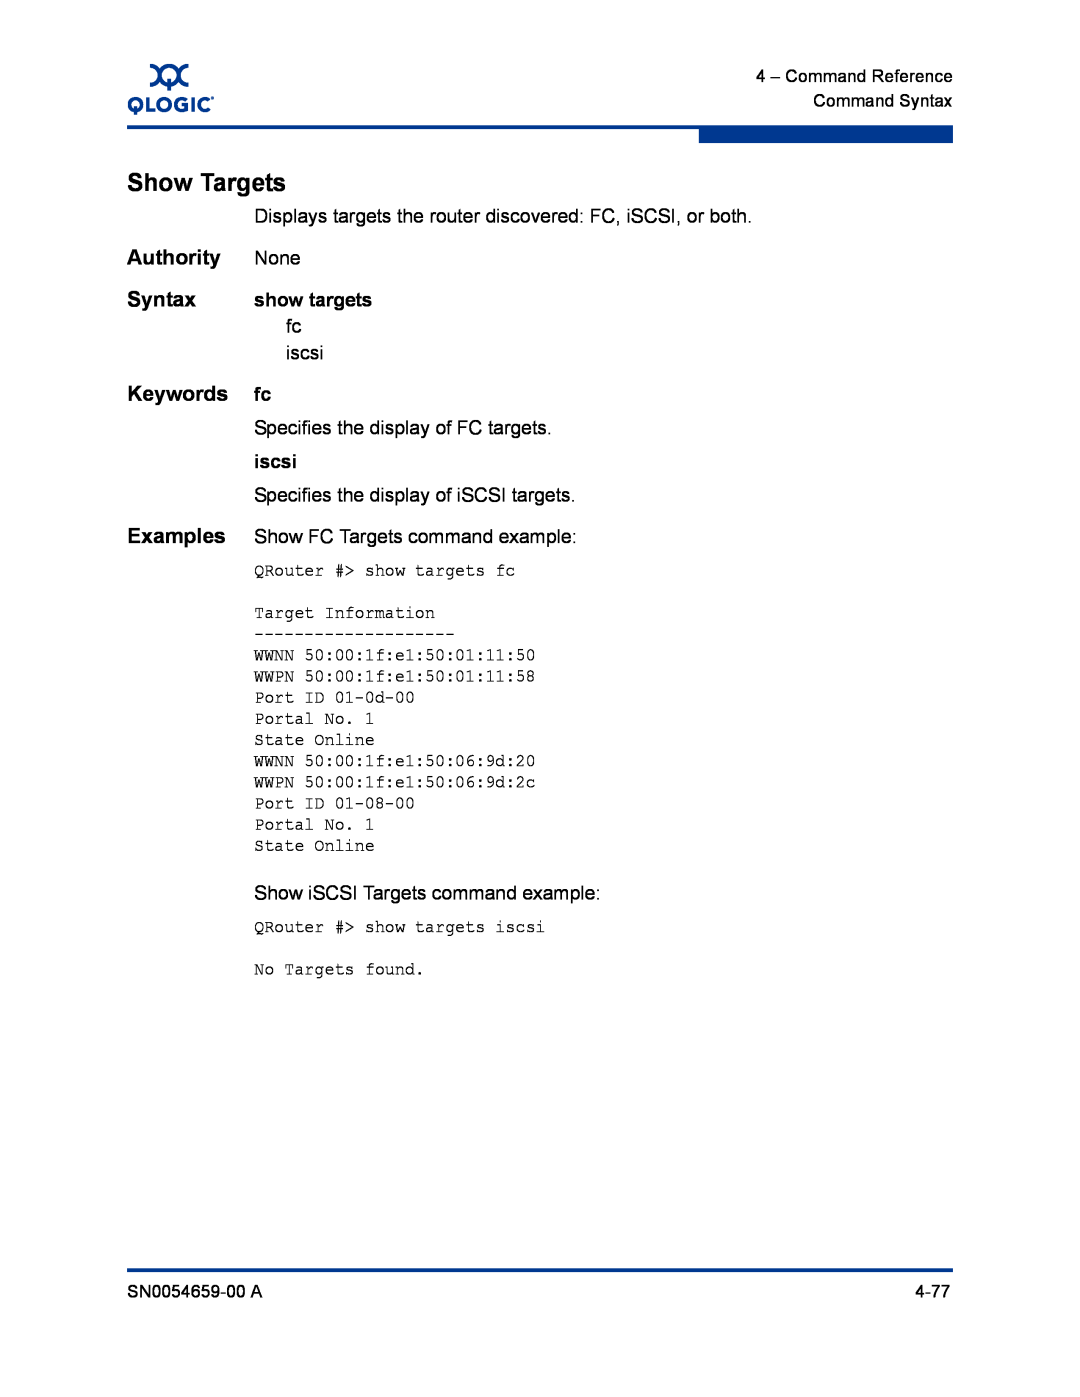 Q-Logic ISR6142 manual Show Targets, Authority, Syntax, Keywords, Examples 